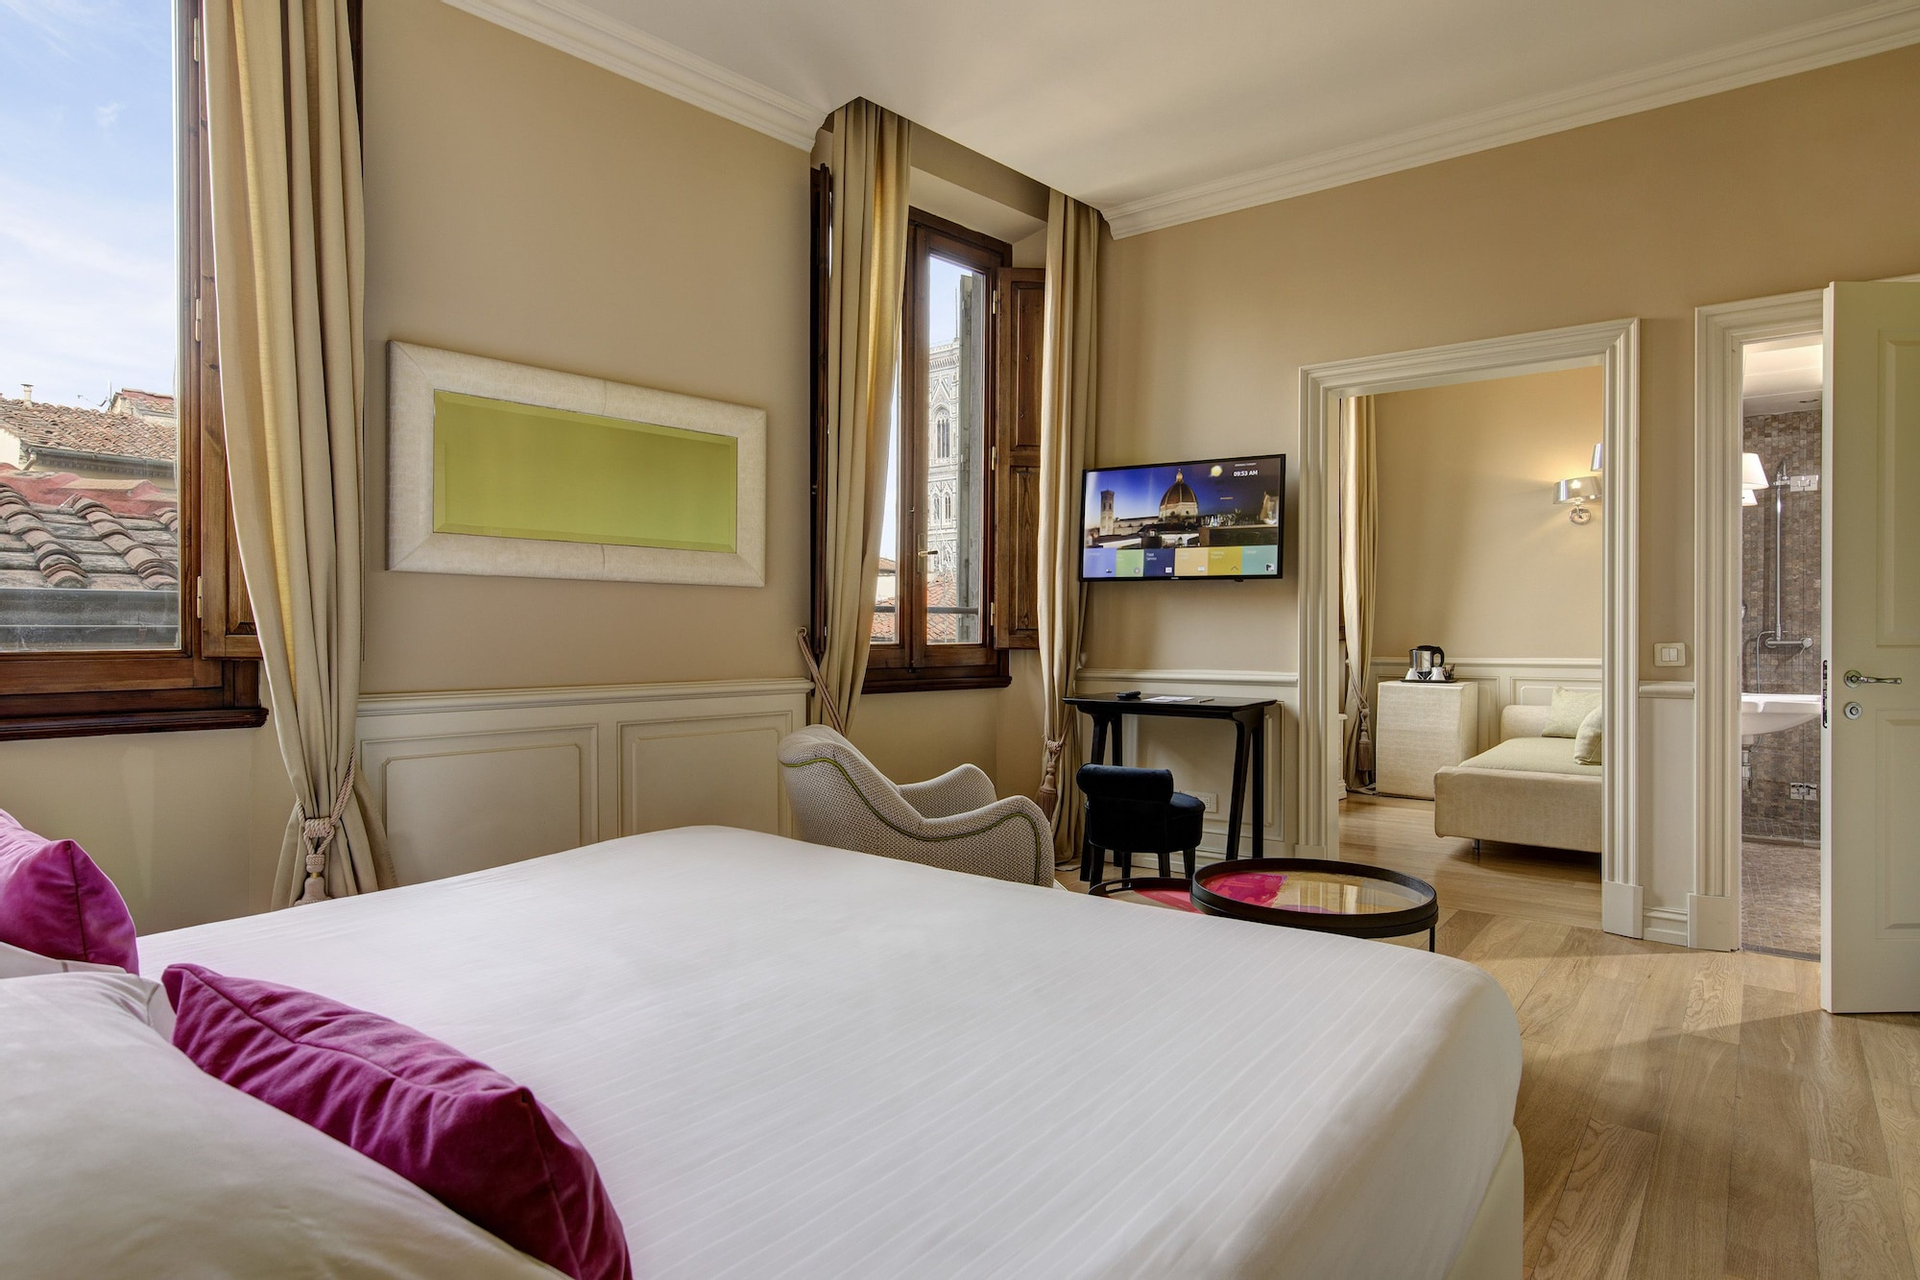 Bedroom 2, Grand Hotel Cavour, Florence